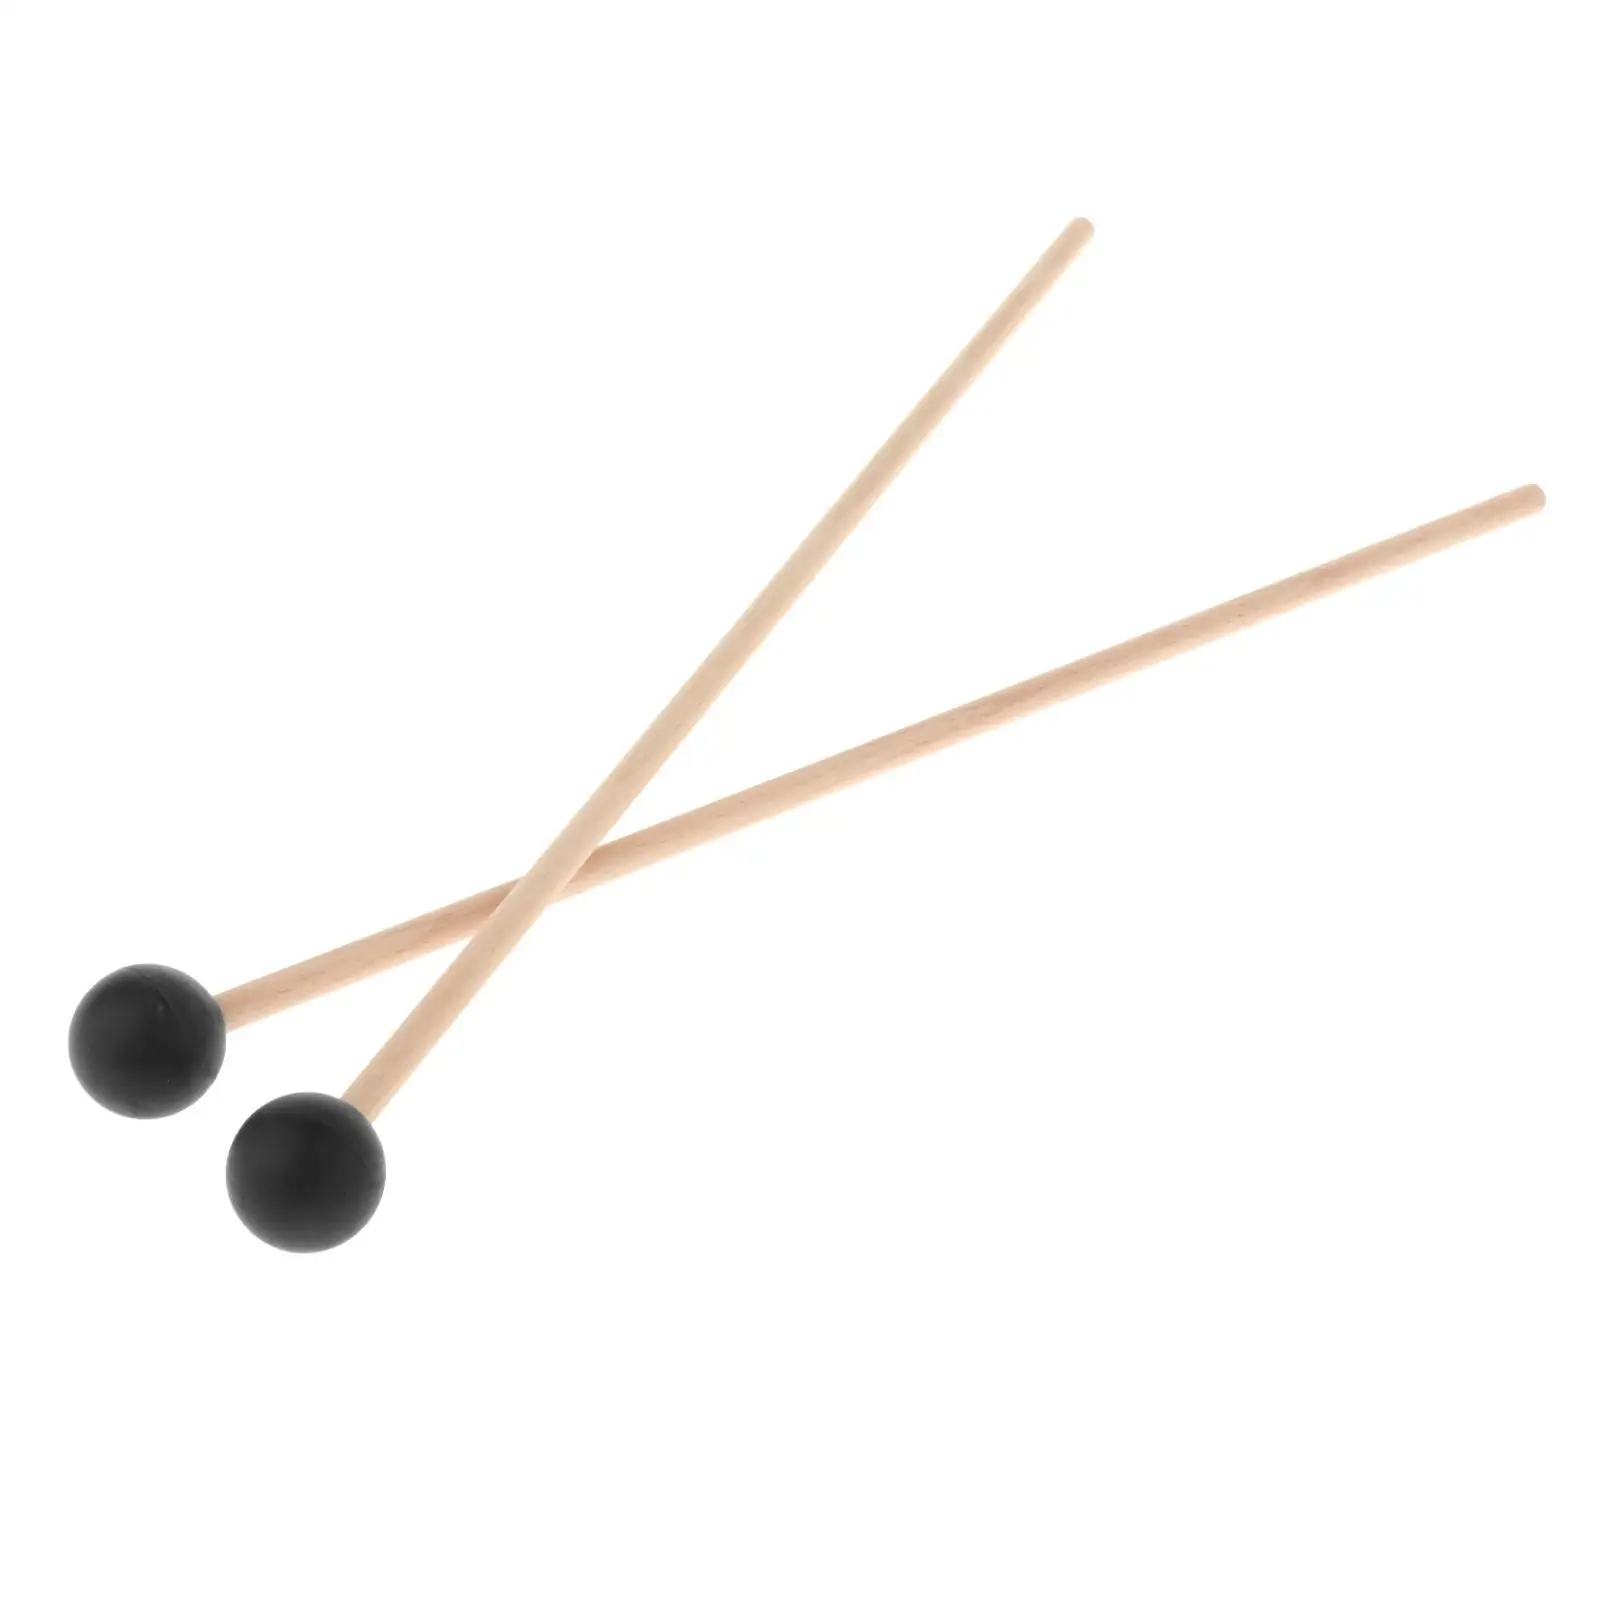 2Pcs Marimba Mallets with Wooden Handle Beater Percussion Xylophone Bell Mallets for Child Drummers Practitioners Ethereal Drums